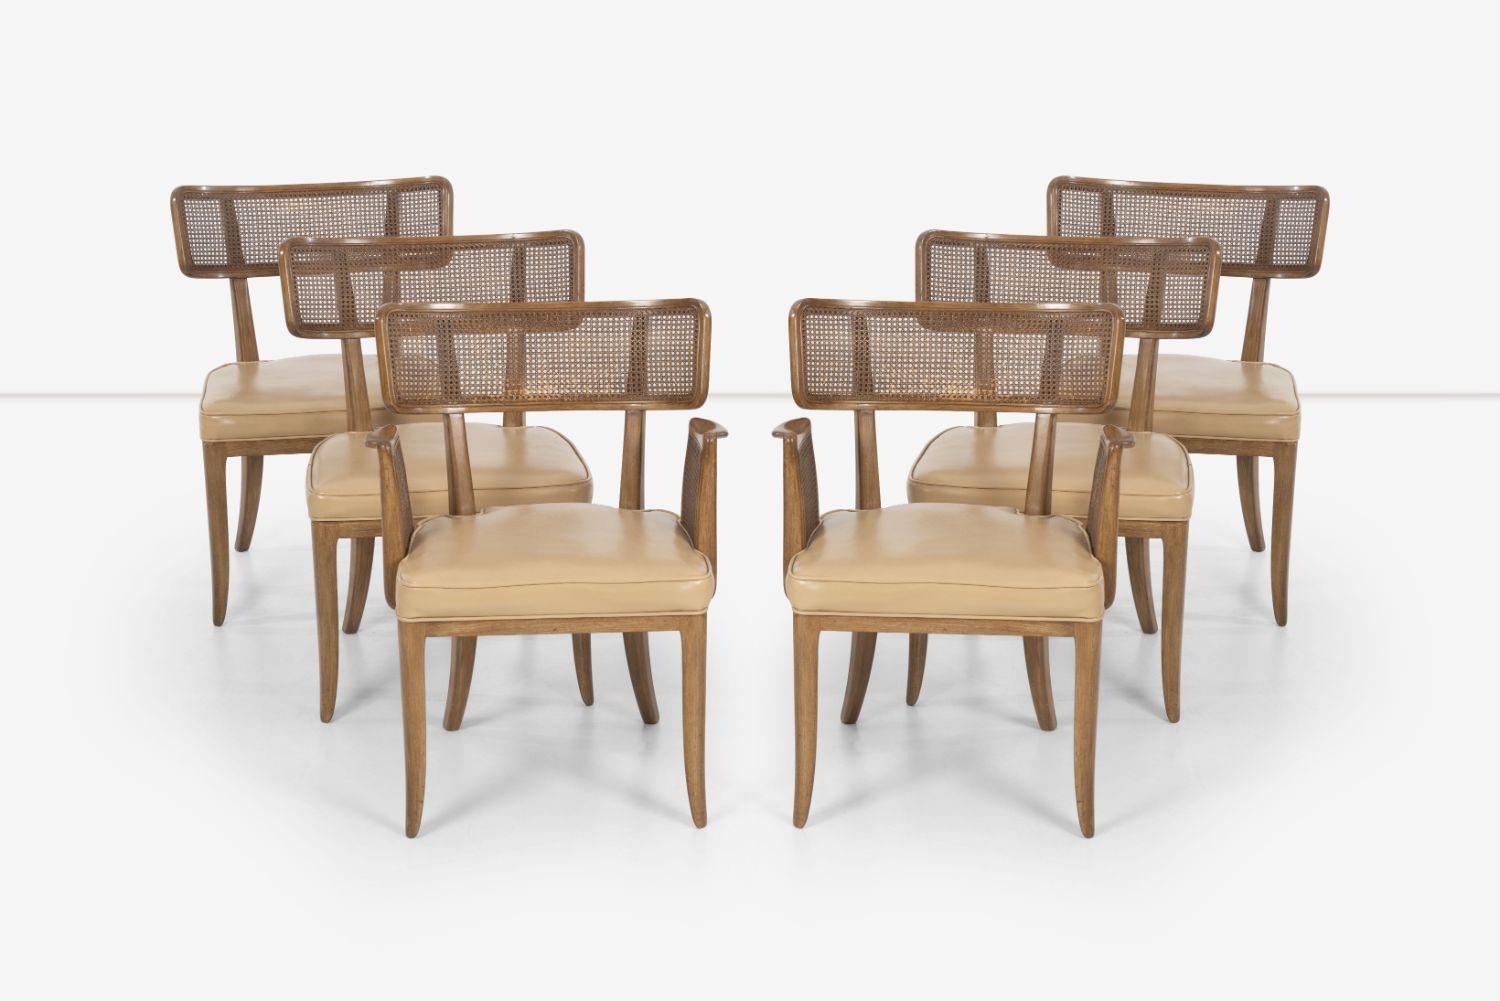 Set of Six Edward Wormley for Dunbar Curved-Back Dining Chairs, Model 4580 without arms and Model 4581 arm chairs, Features solid mahogany frames with cane backs and original leather seats.